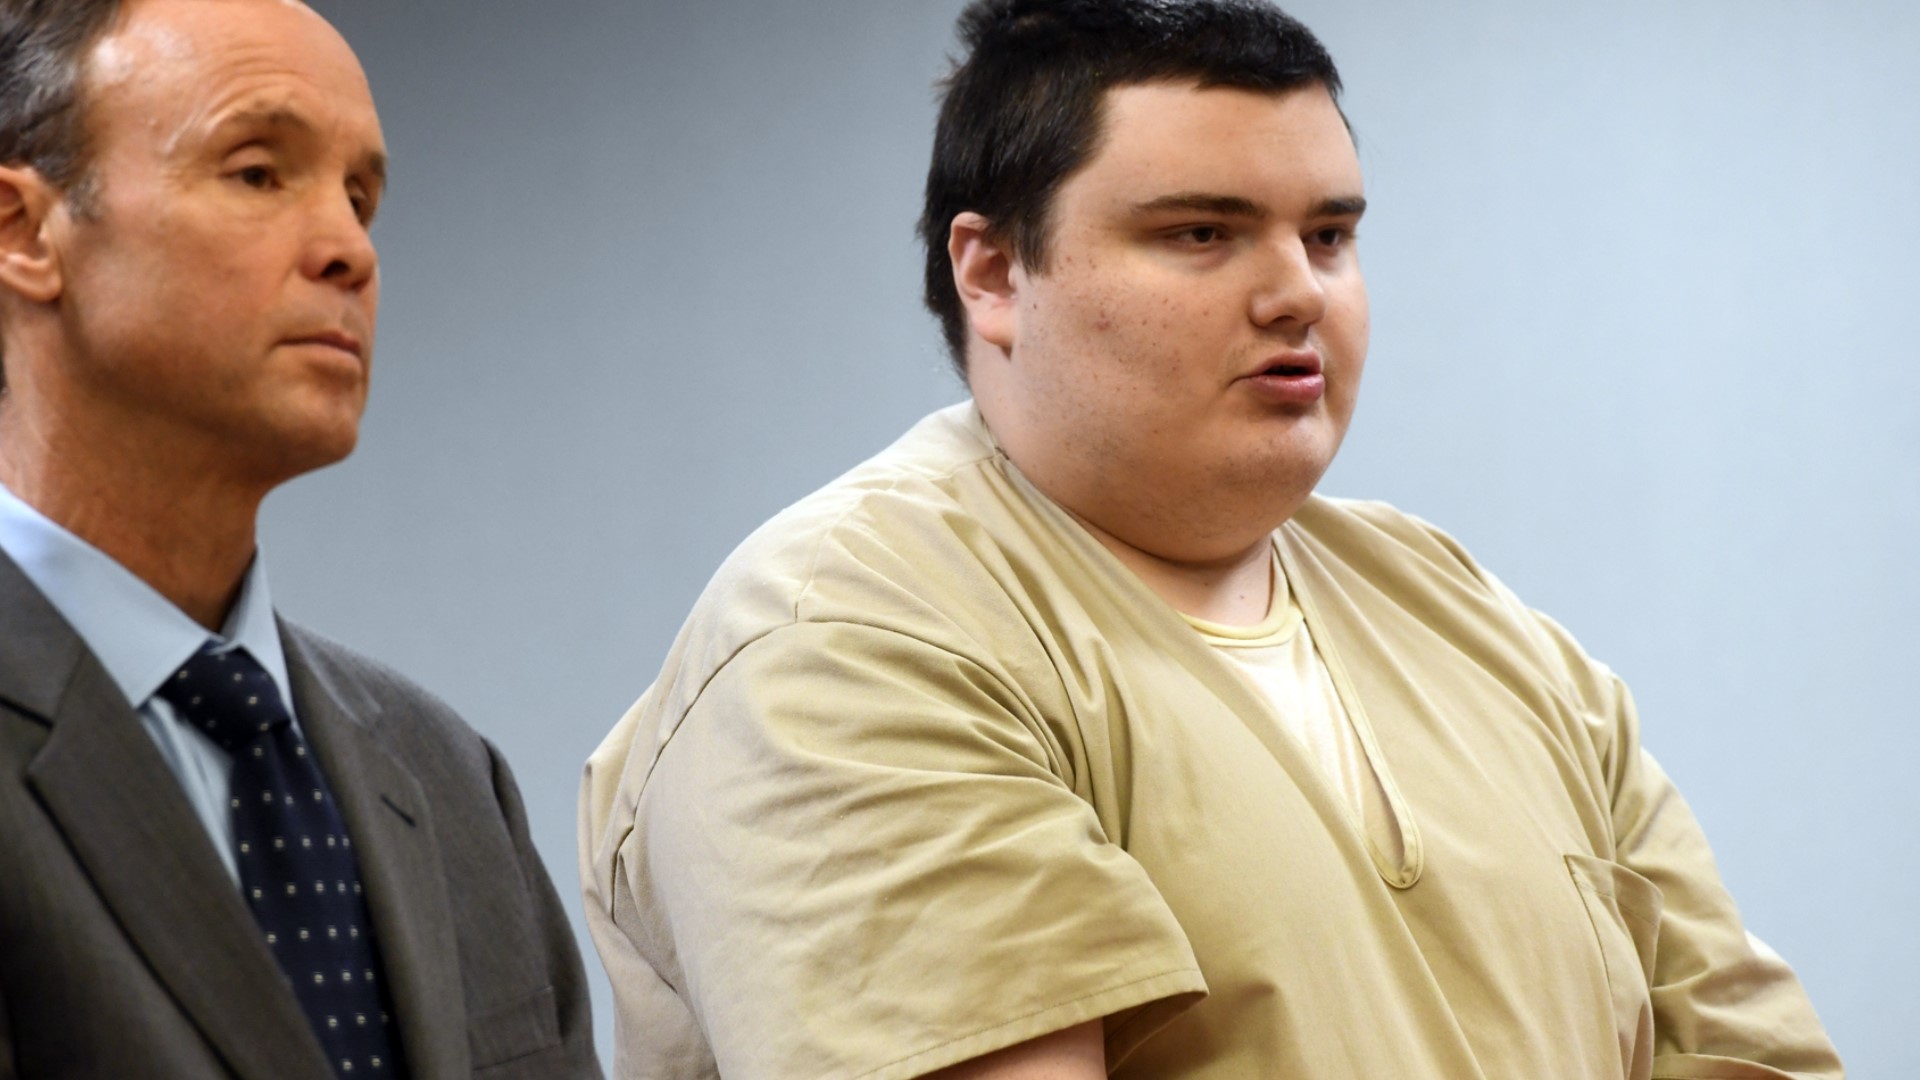 Manfredonia is also expected to plead guilty next week to charges in connection to a second murder and a kidnapping in Derby, according to his attorney.